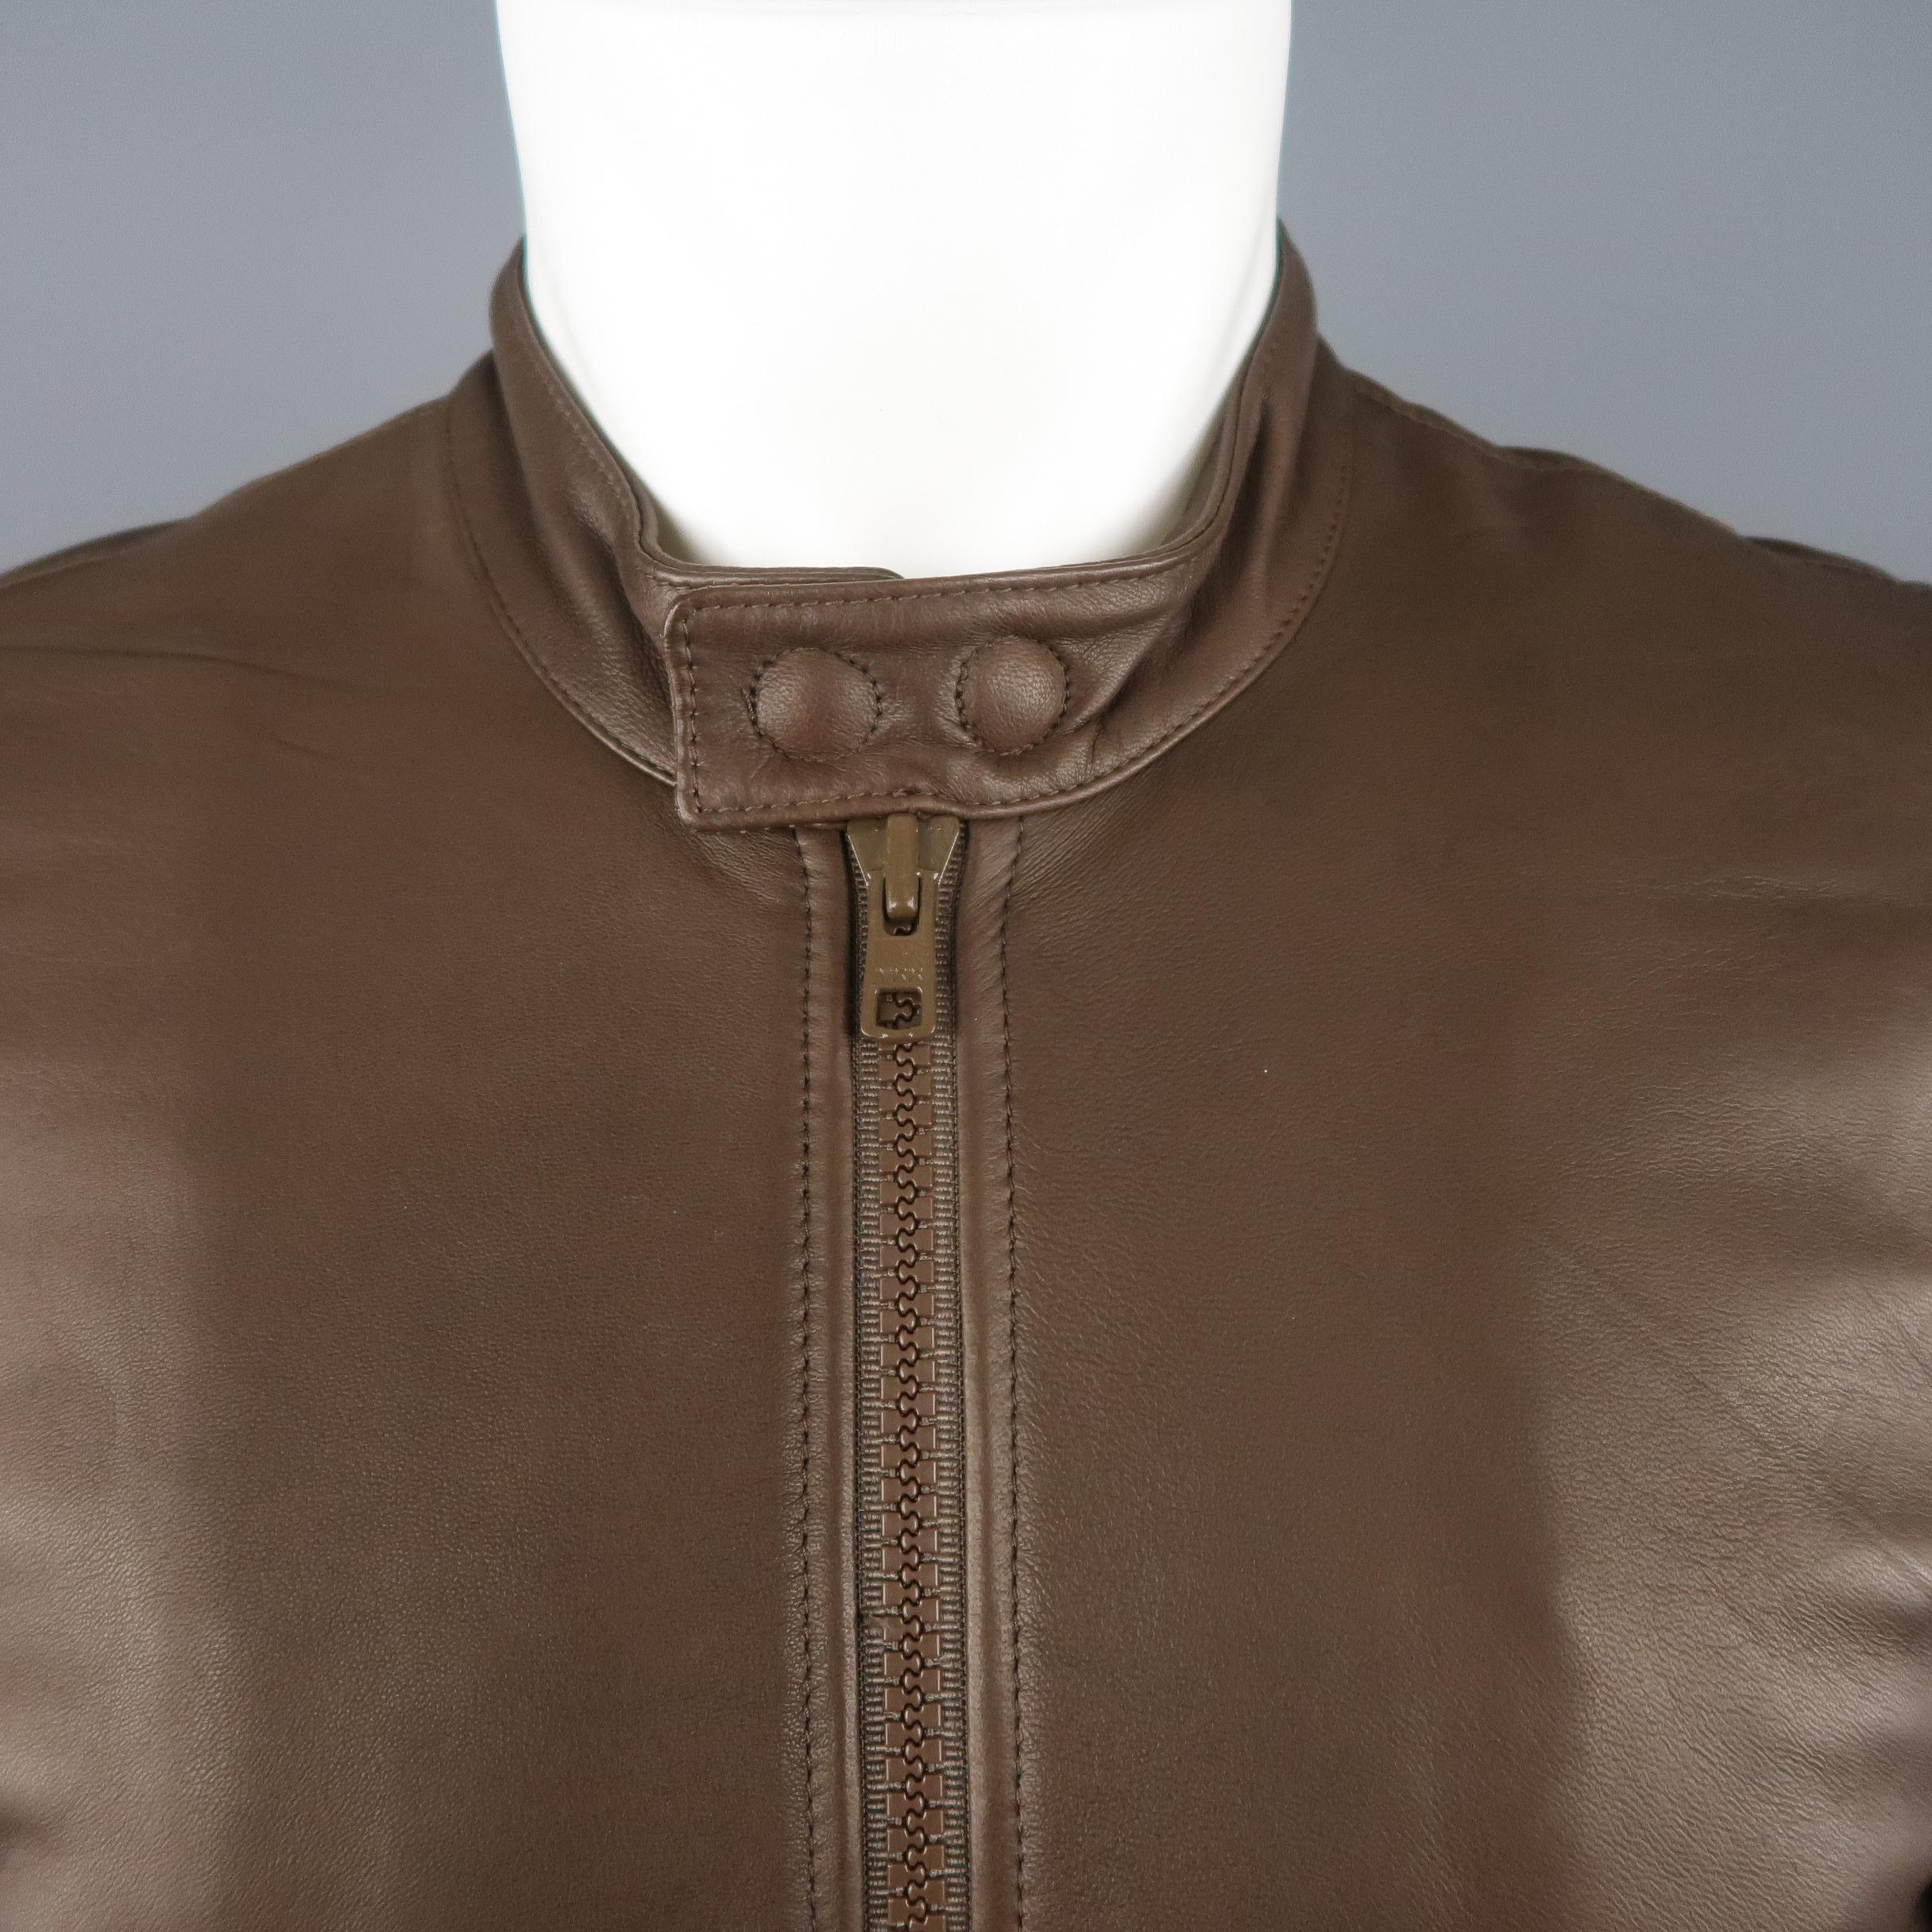 BAND OF OUTSIDERS bomber jacket comes in soft brown leather with a snap band collar, brown zip front, flap snap pockets, elbow patches, and ribbed knit waistband and cuffs.  Made in Italy.
 
New with Tags.
Marked: 1
 
Measurements:
 
Shoulder: 17